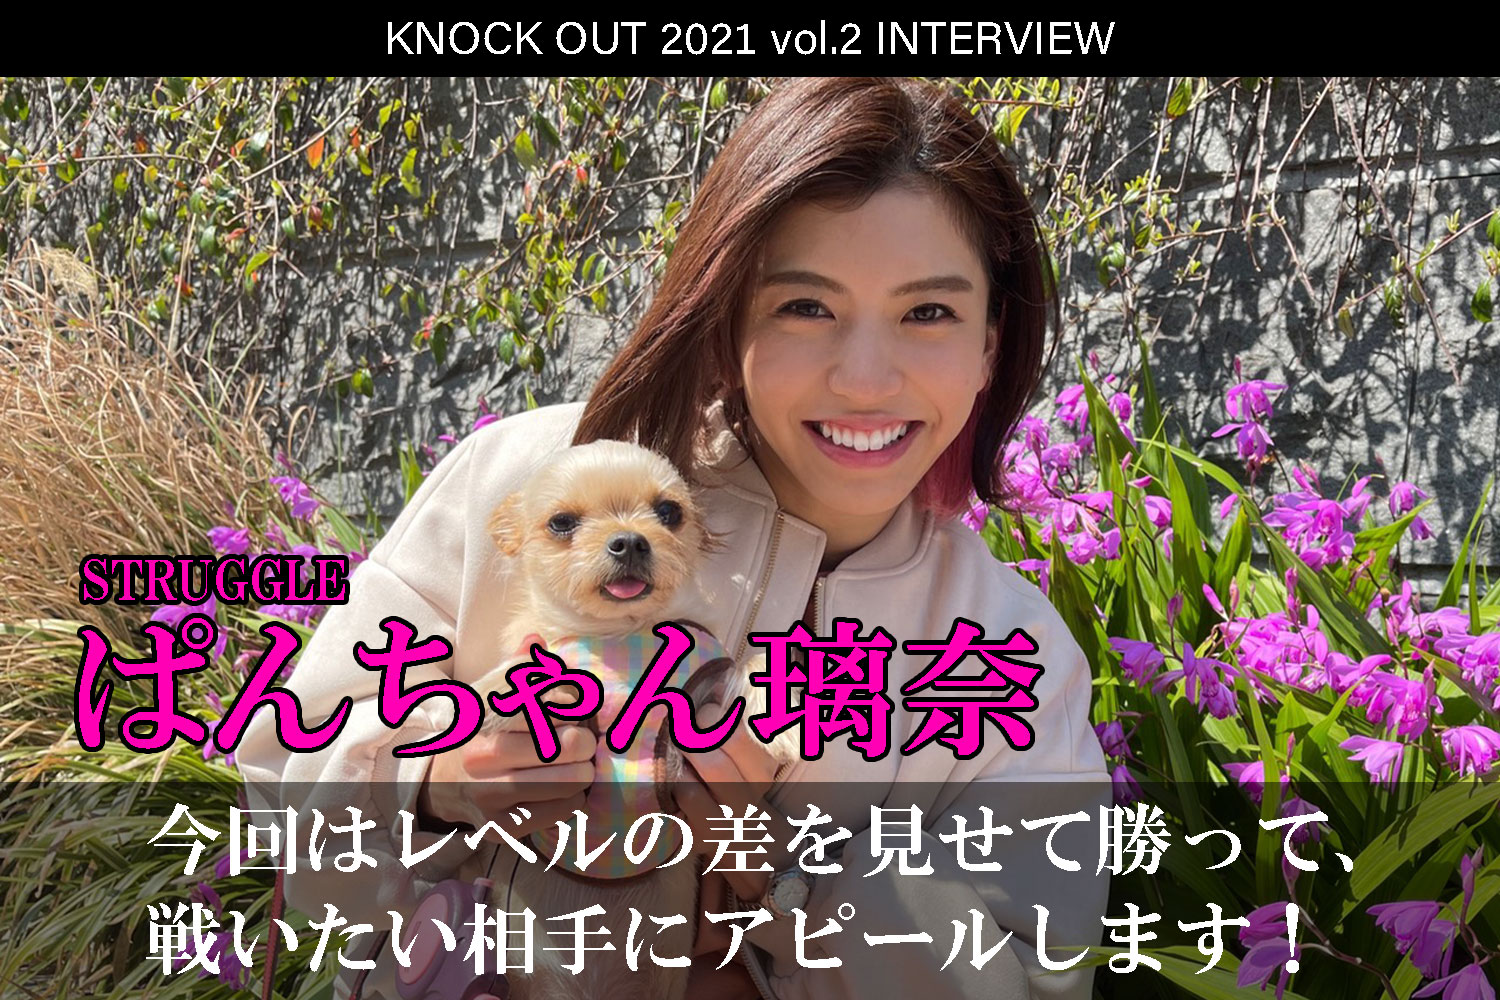 4.25 KNOCK OUT 2021 vol.2｜ぱんちゃん璃奈インタビュー公開！